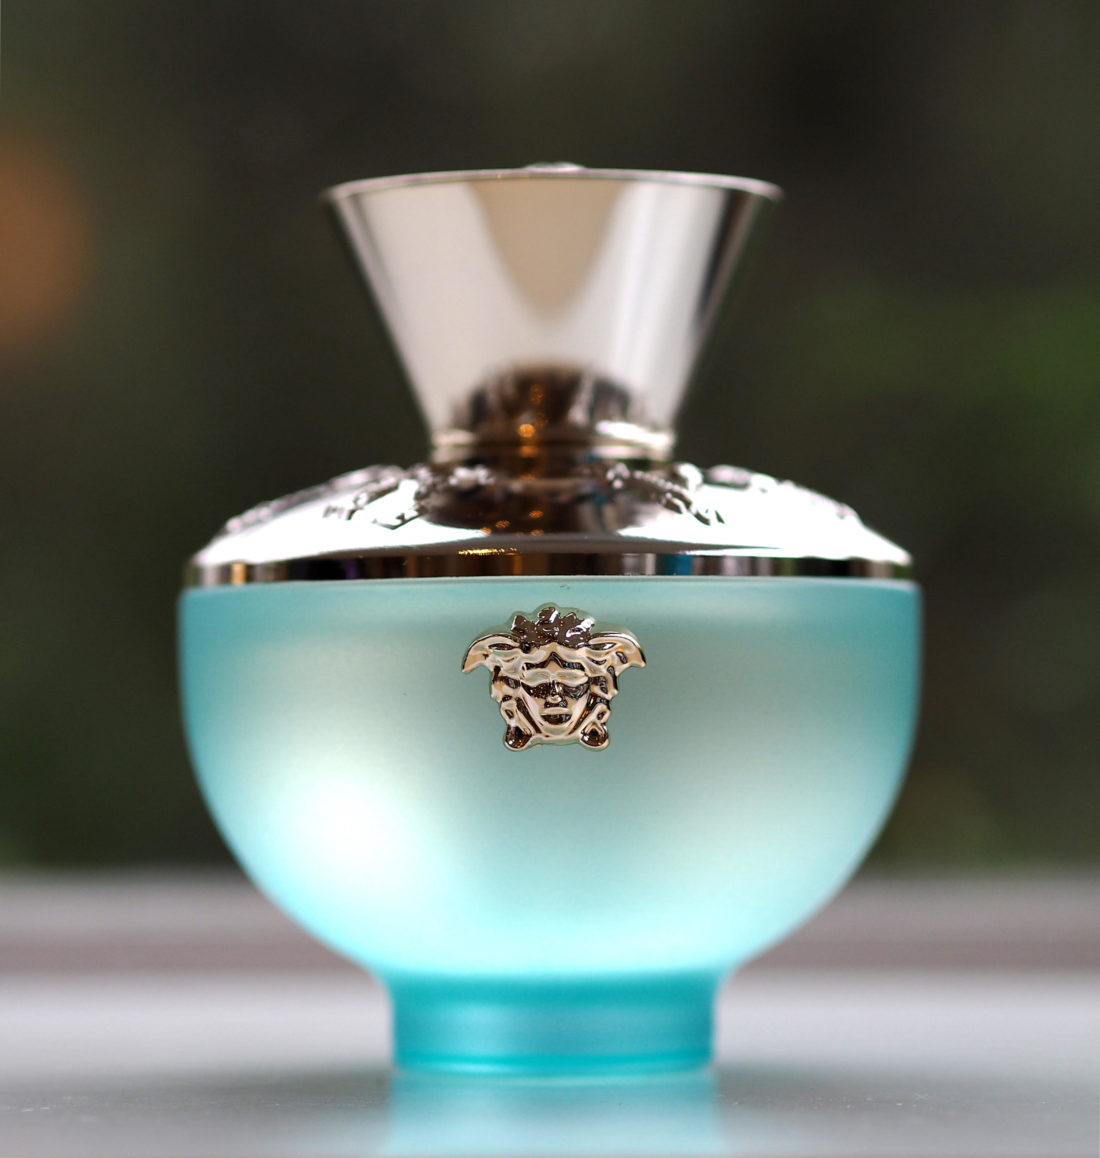 Versace Dylan Turquoise EDT